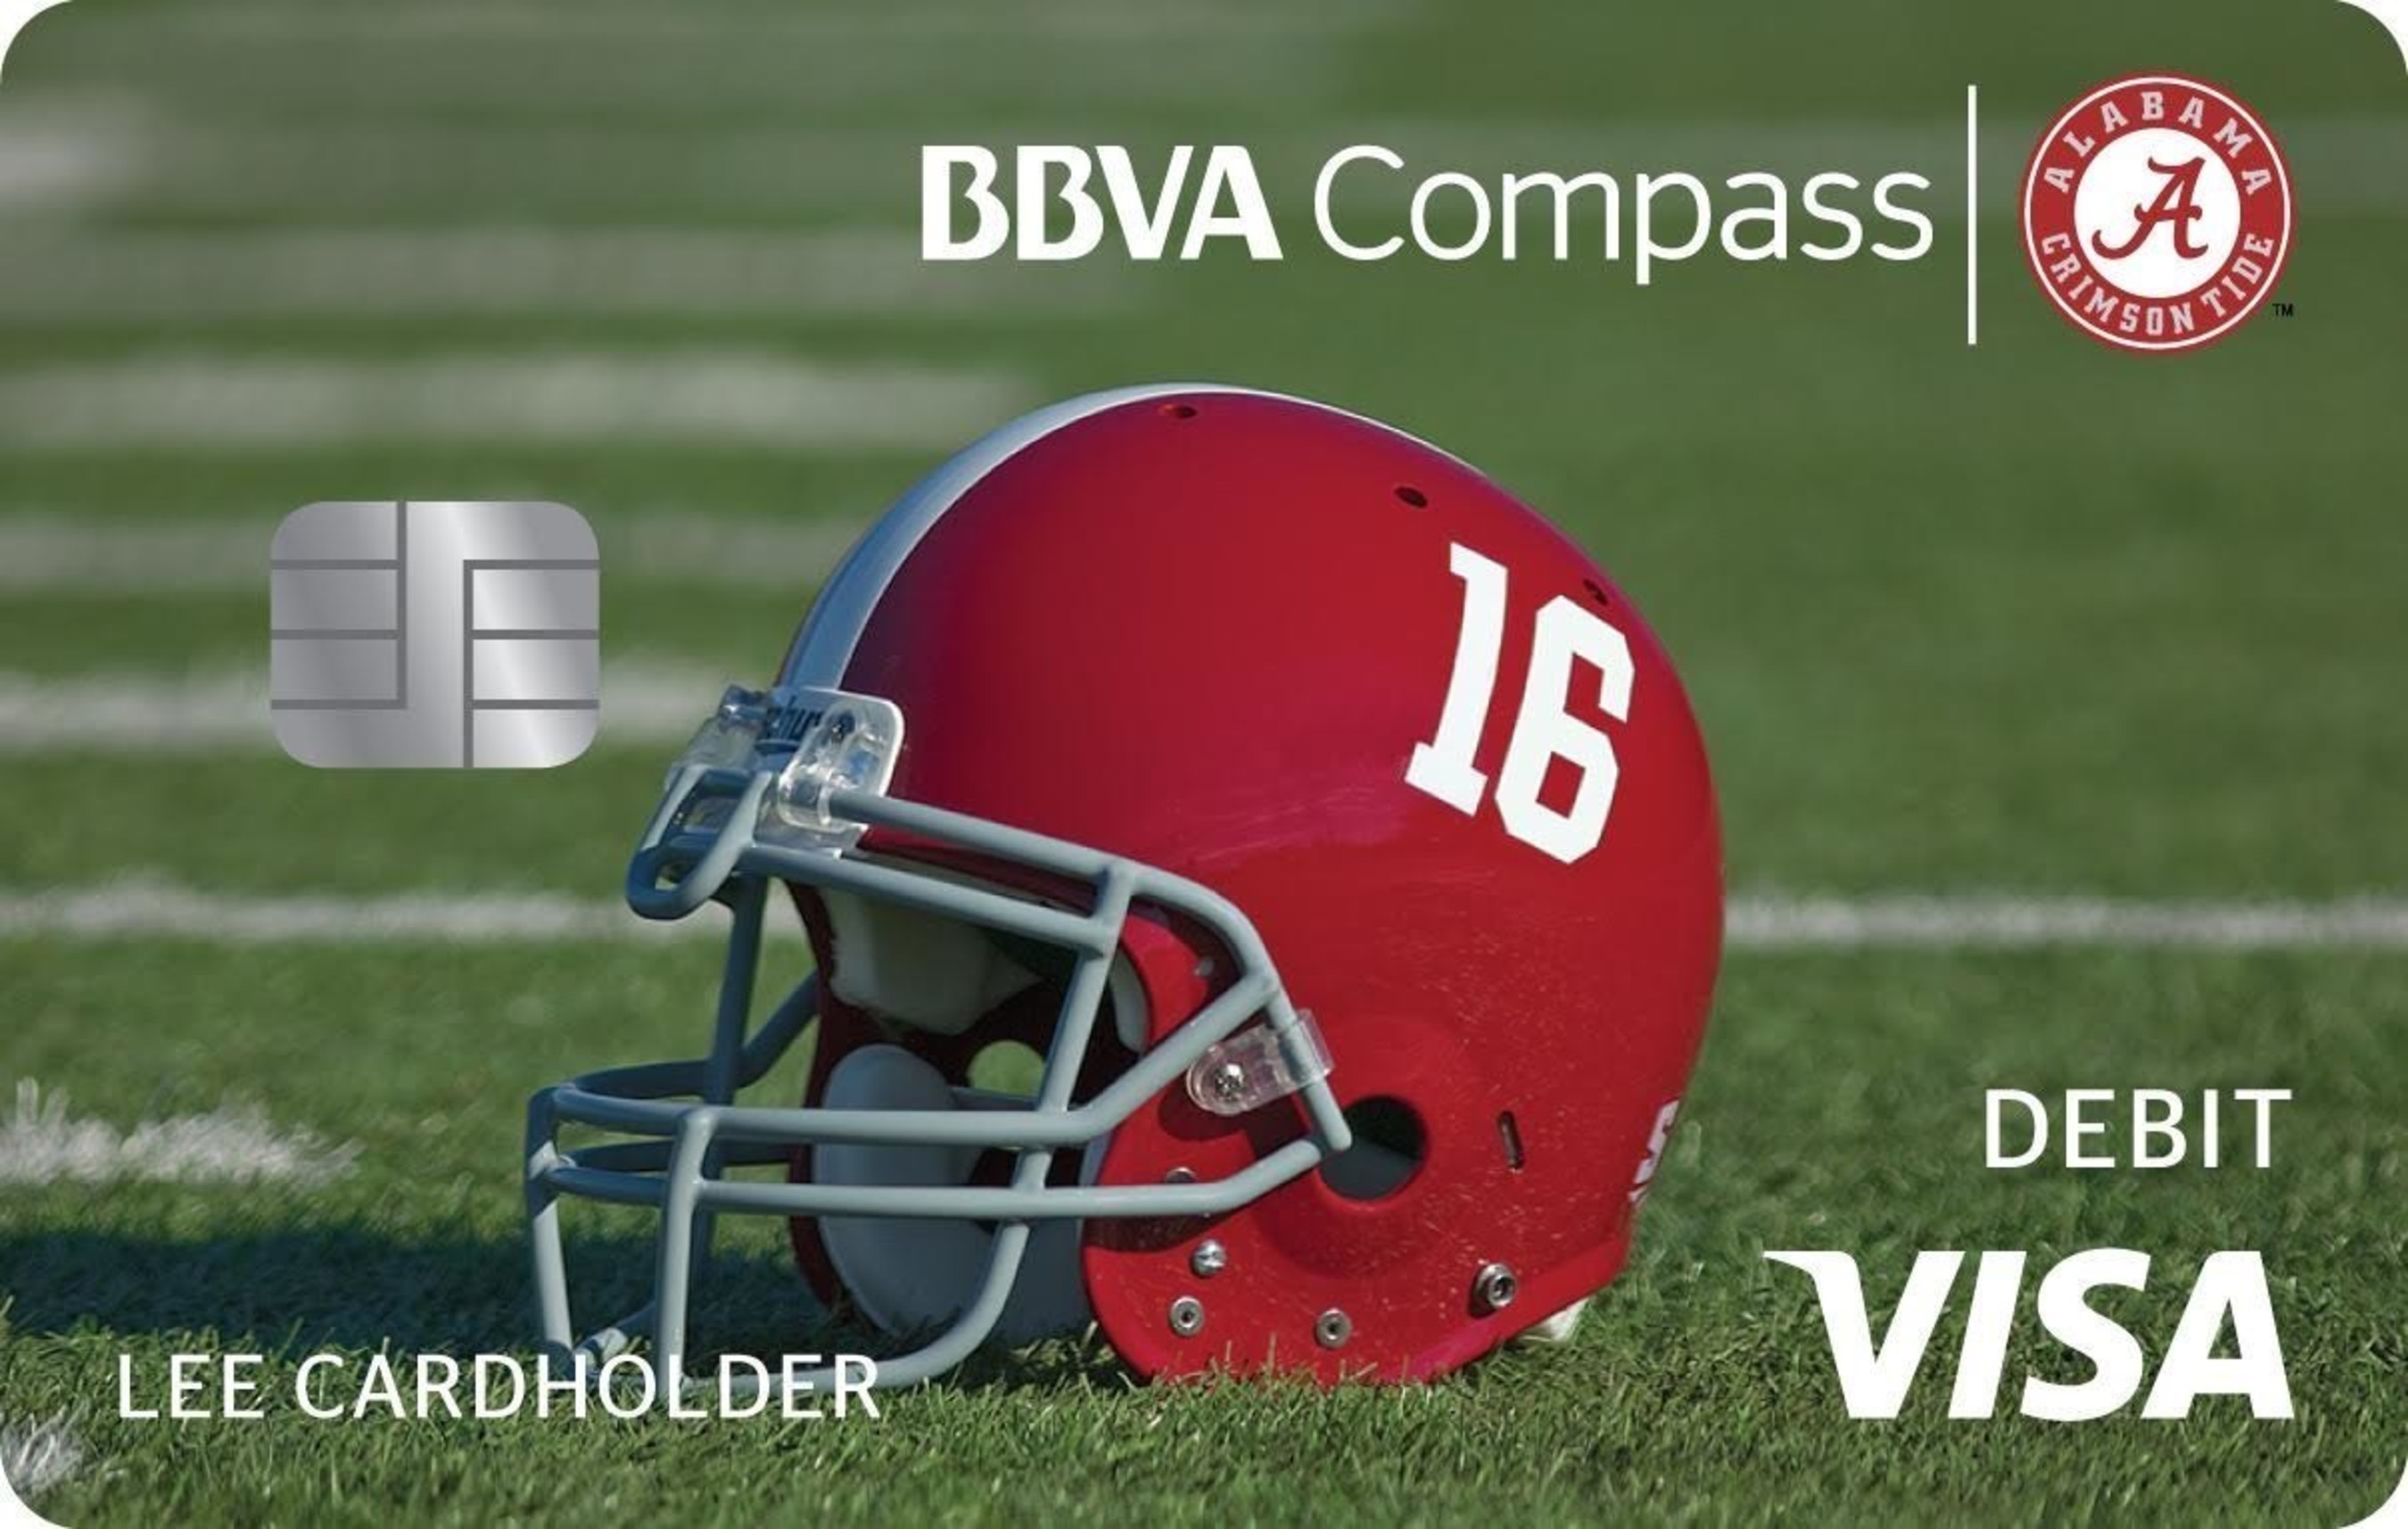 BBVA Compass will roll out its commemorative Bama-branded Visa(R) check card next month. Fans can flash their Crimson Tide pride every time they swipe their cards.